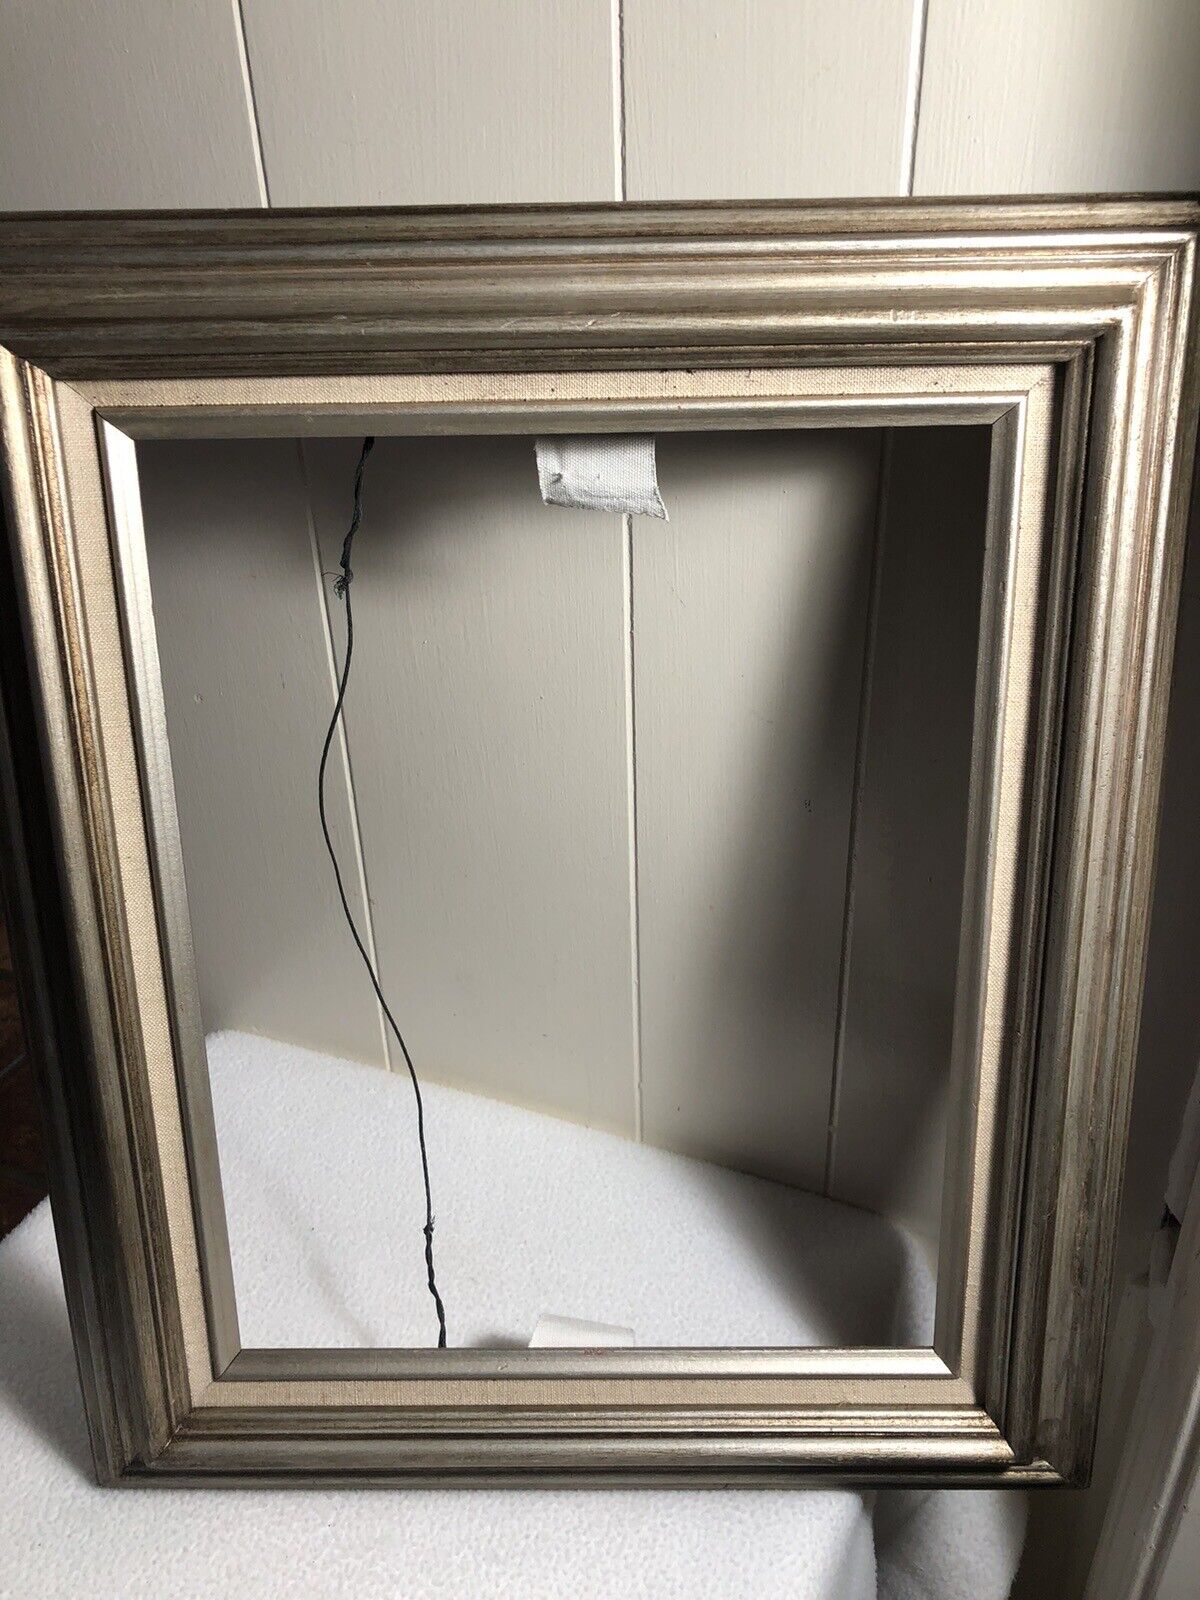 VTG 19x16 Antq. Finish Silver/Gray Wood Picture Frame w/Linen Liner Holds 11x14